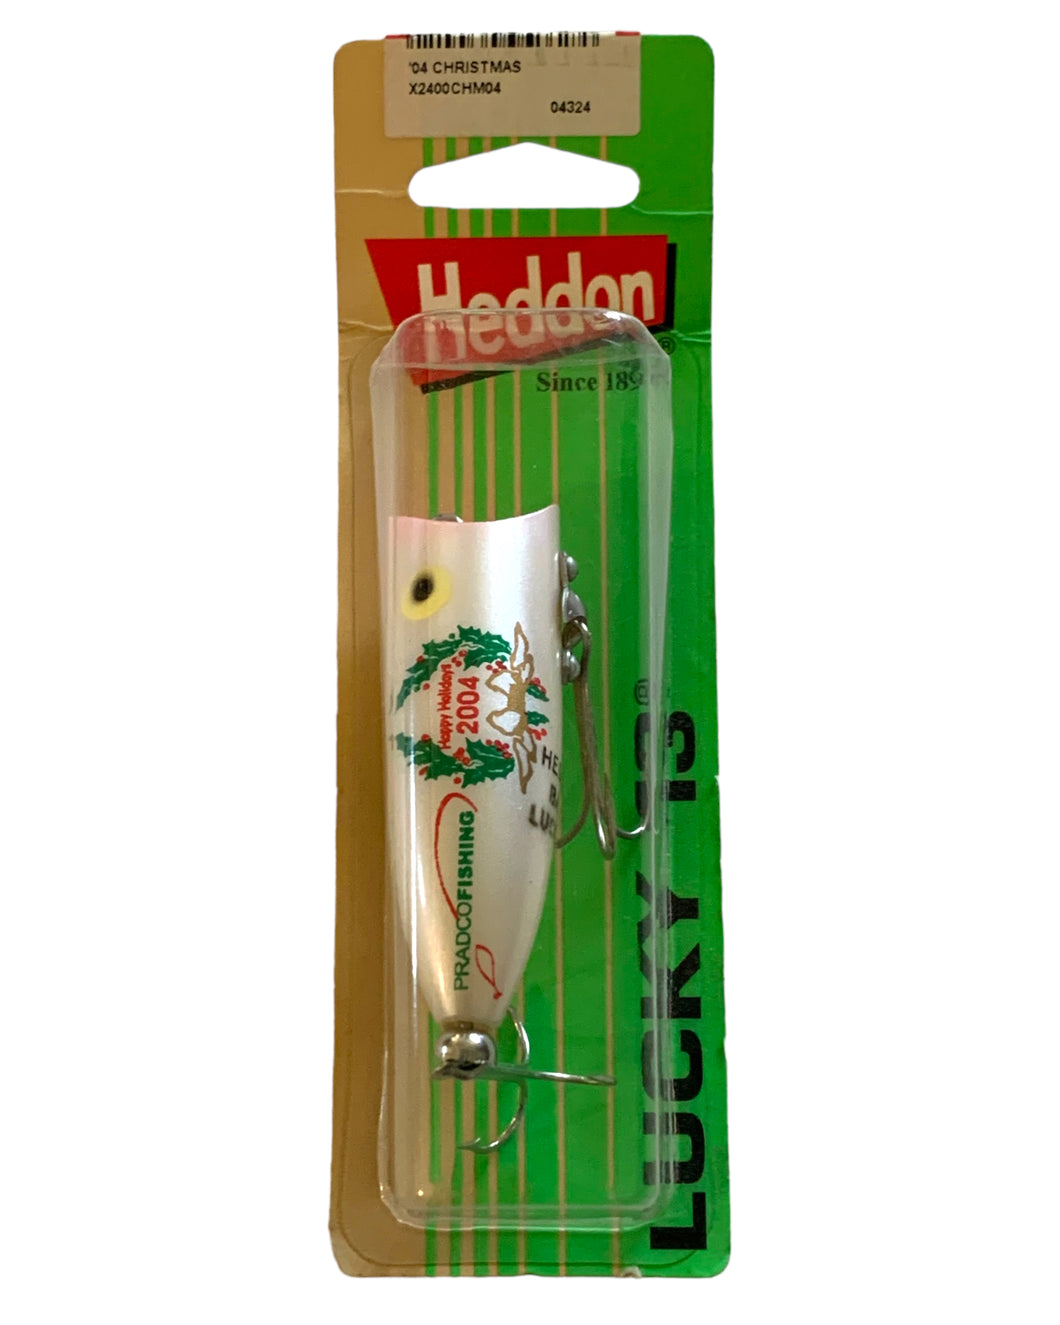 Front Package View of HEDDON LURE COMPANY LUCKY 13 Fishing Lure • 2004 PRADCO CHRISTMAS. Available at Toad Tackle.